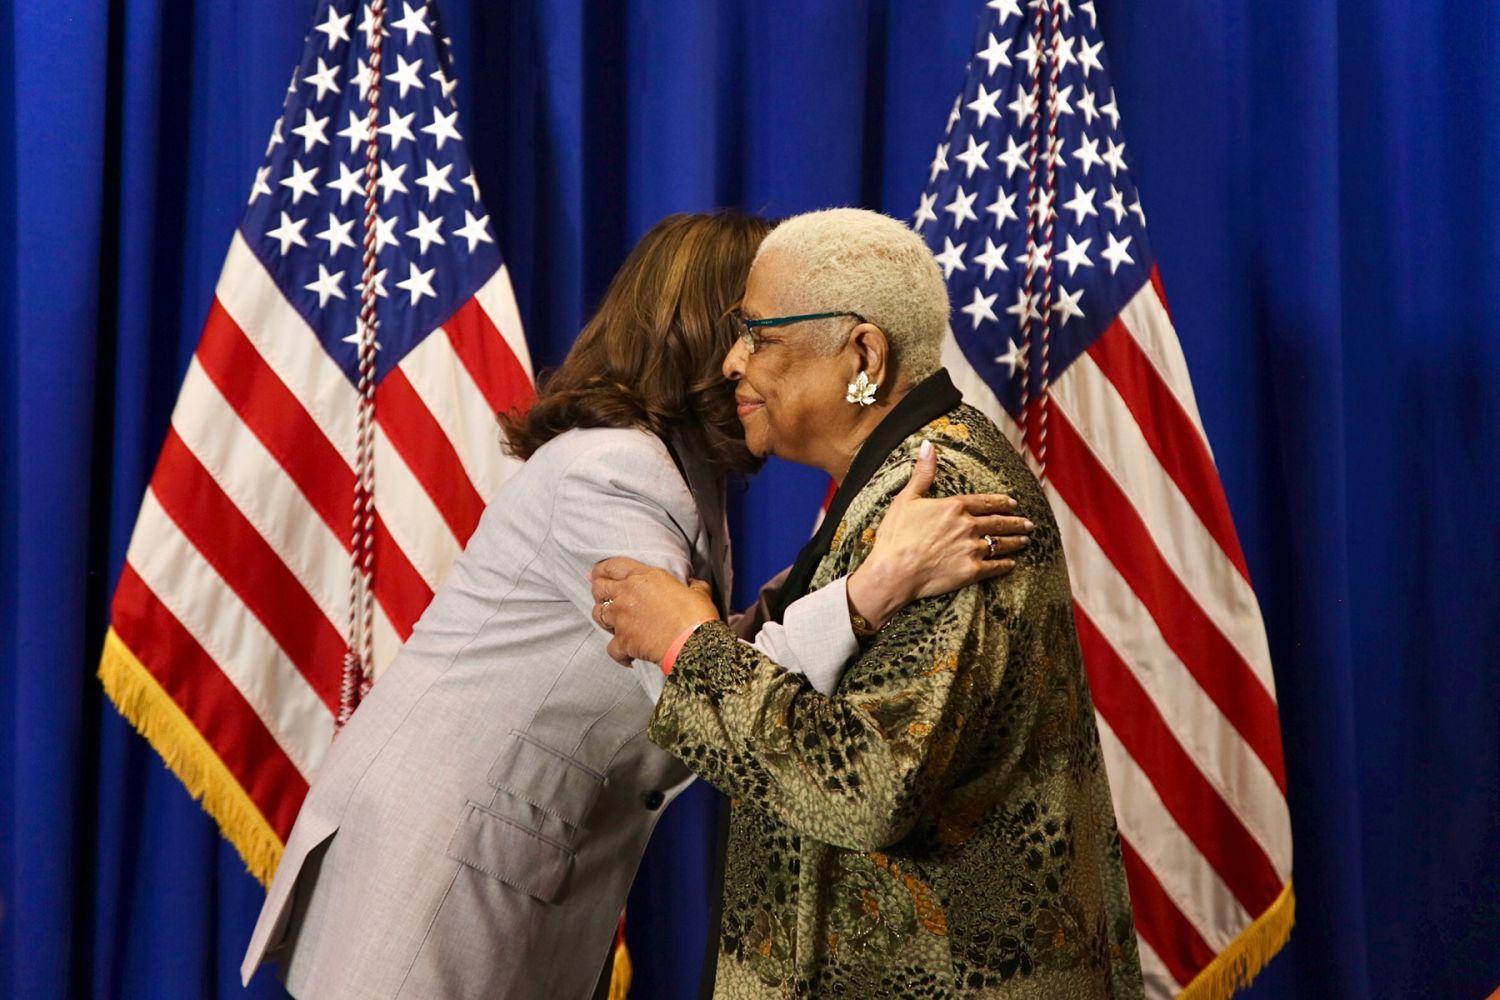 <p>Harris embraces with a fellow AKA sorority sister in Jacksonville, Florida.</p>